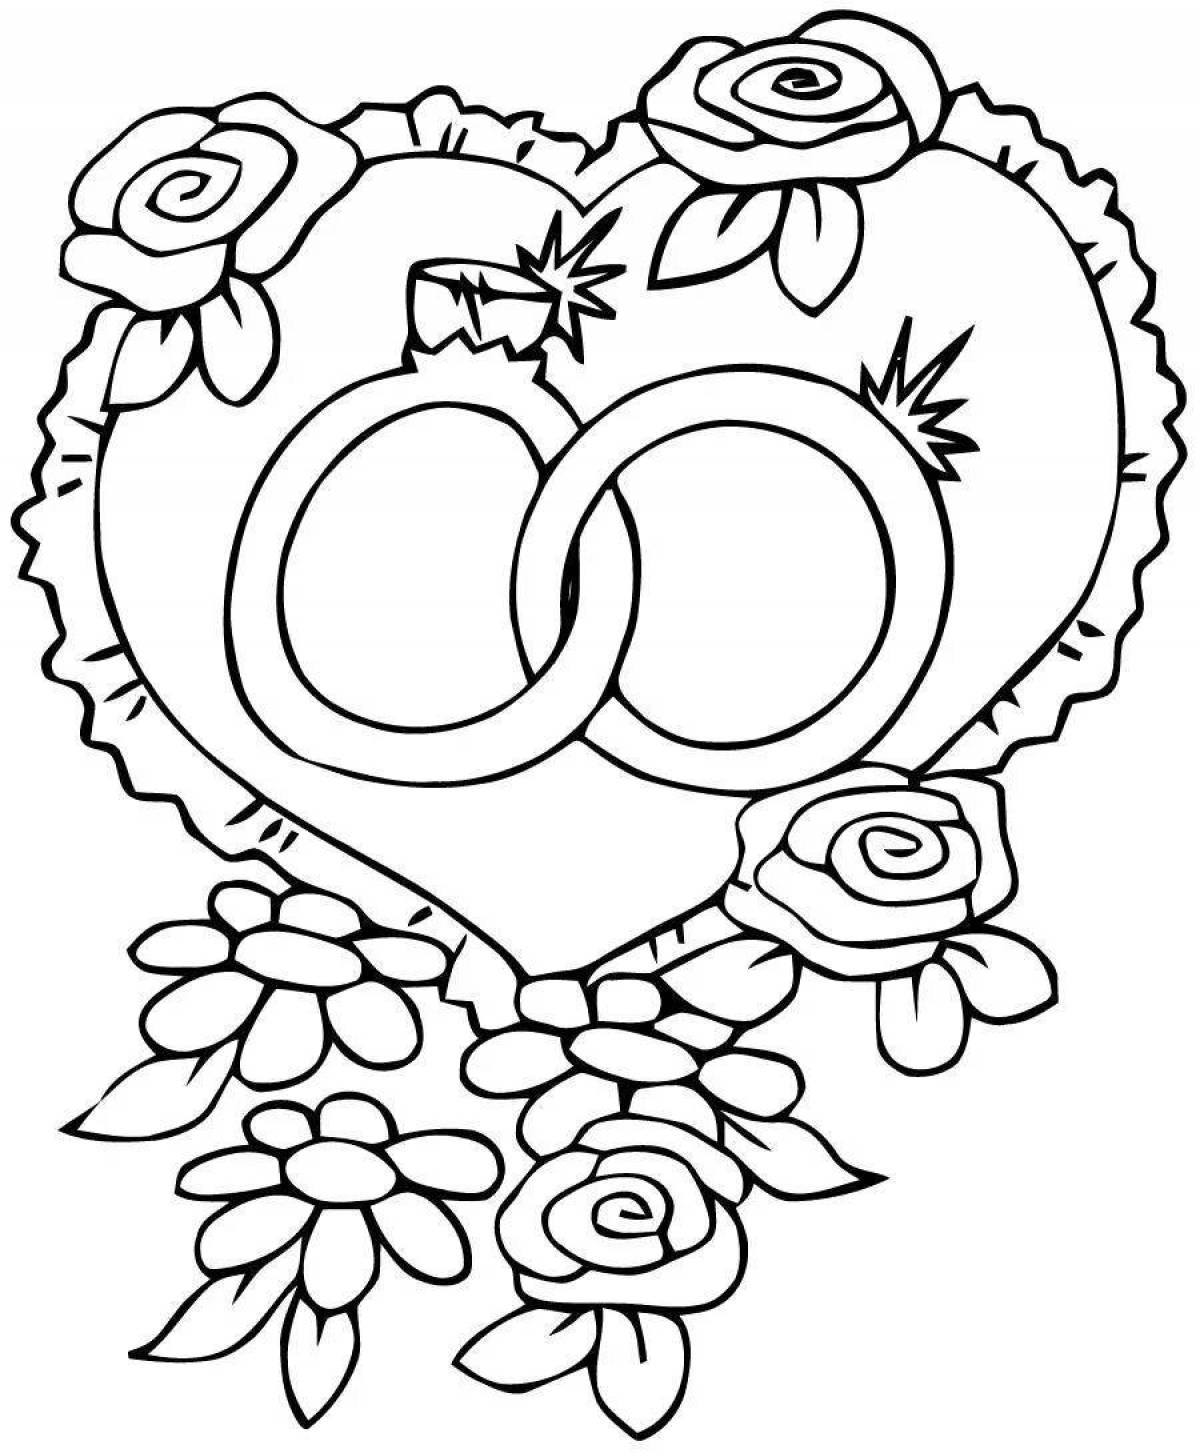 Adorable wedding ring coloring pages